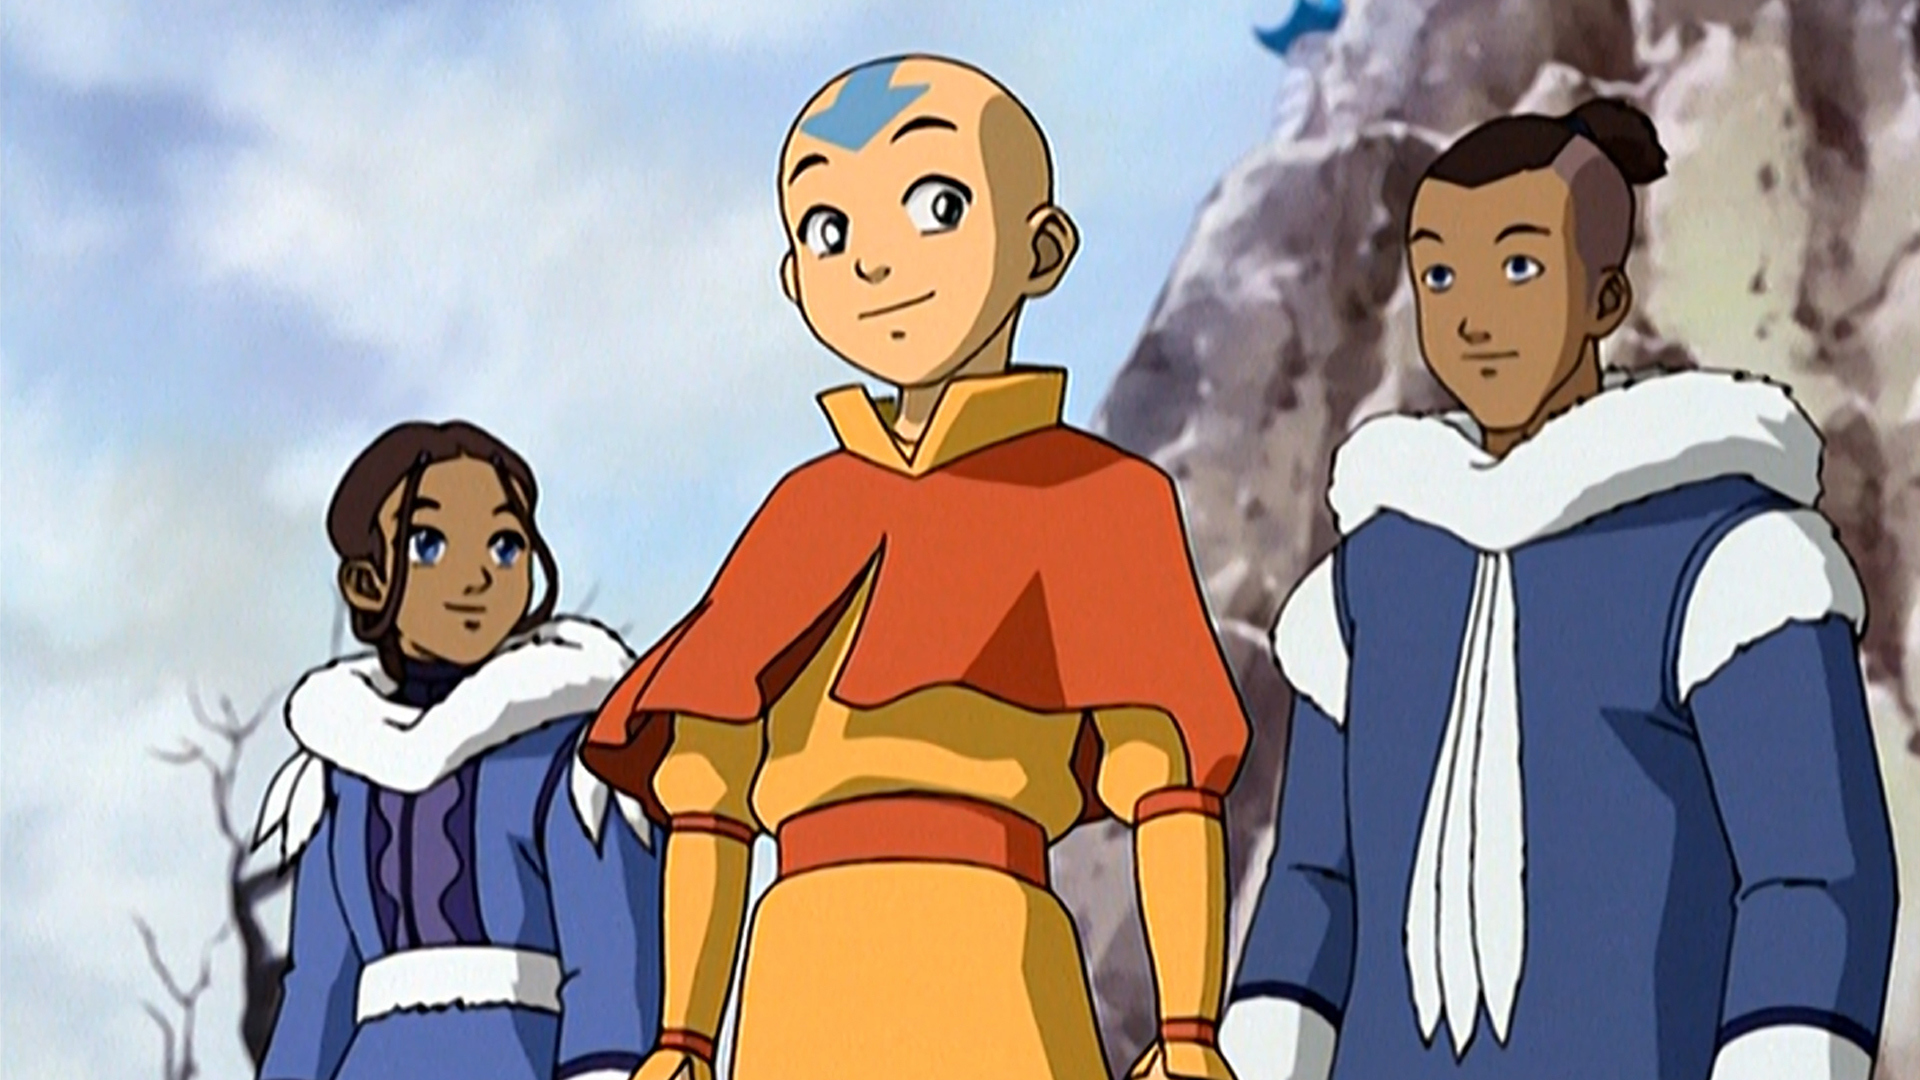 Avatar The Last Airbender Season 1 Our 5 SeriesDefining Moments